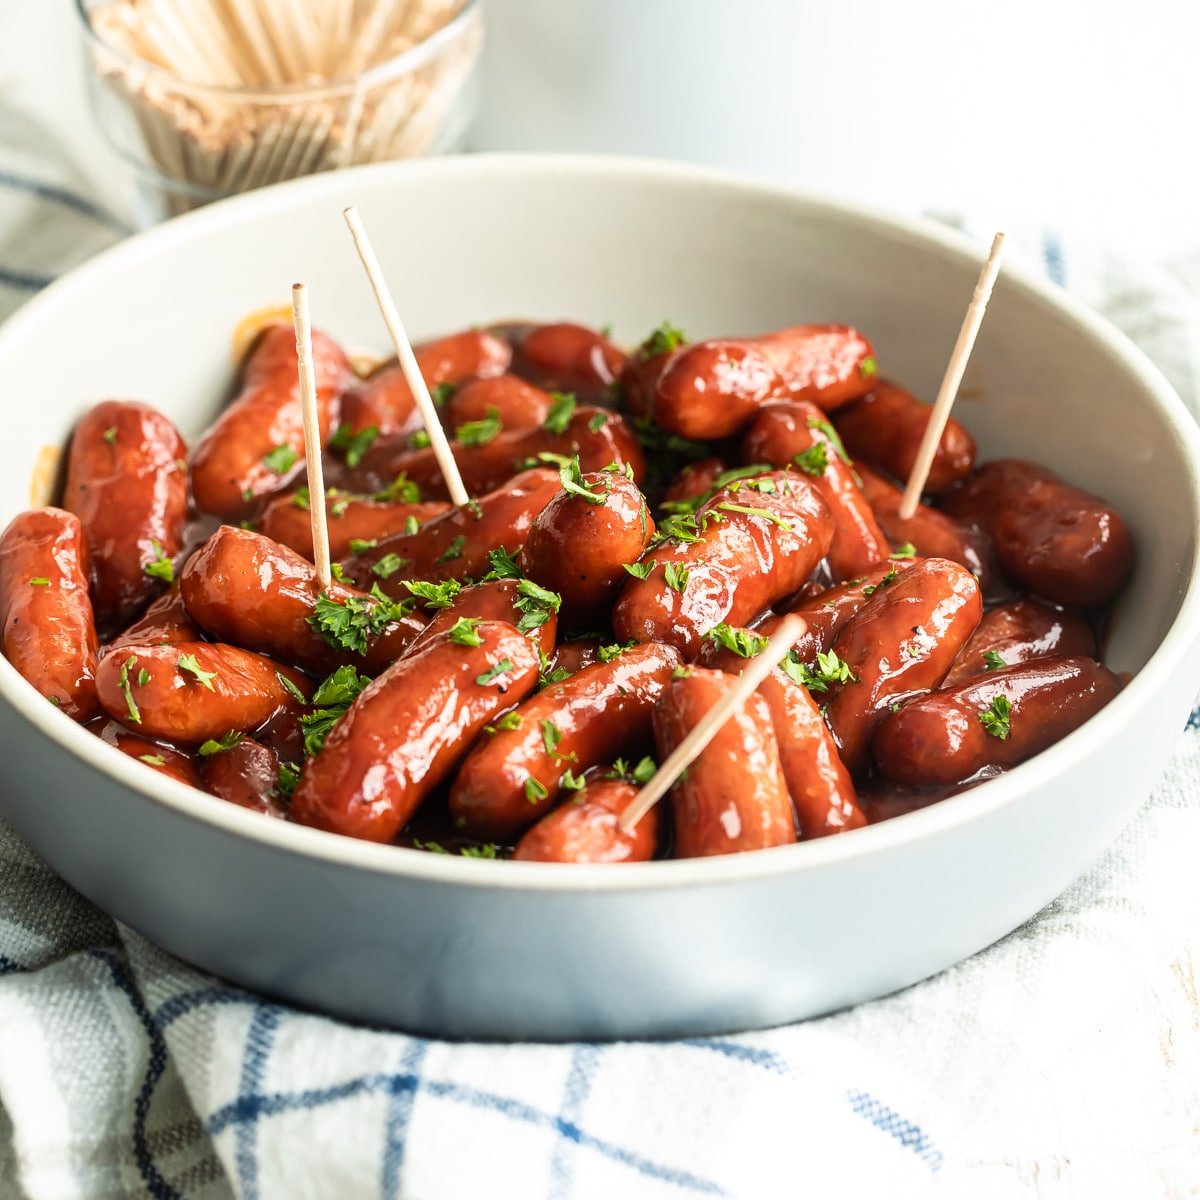 https://www.culinaryhill.com/wp-content/uploads/2020/10/2-Ingredient-Barbecue-Little-SmokIes-Culinary-Hill-HR-06SQ.jpg